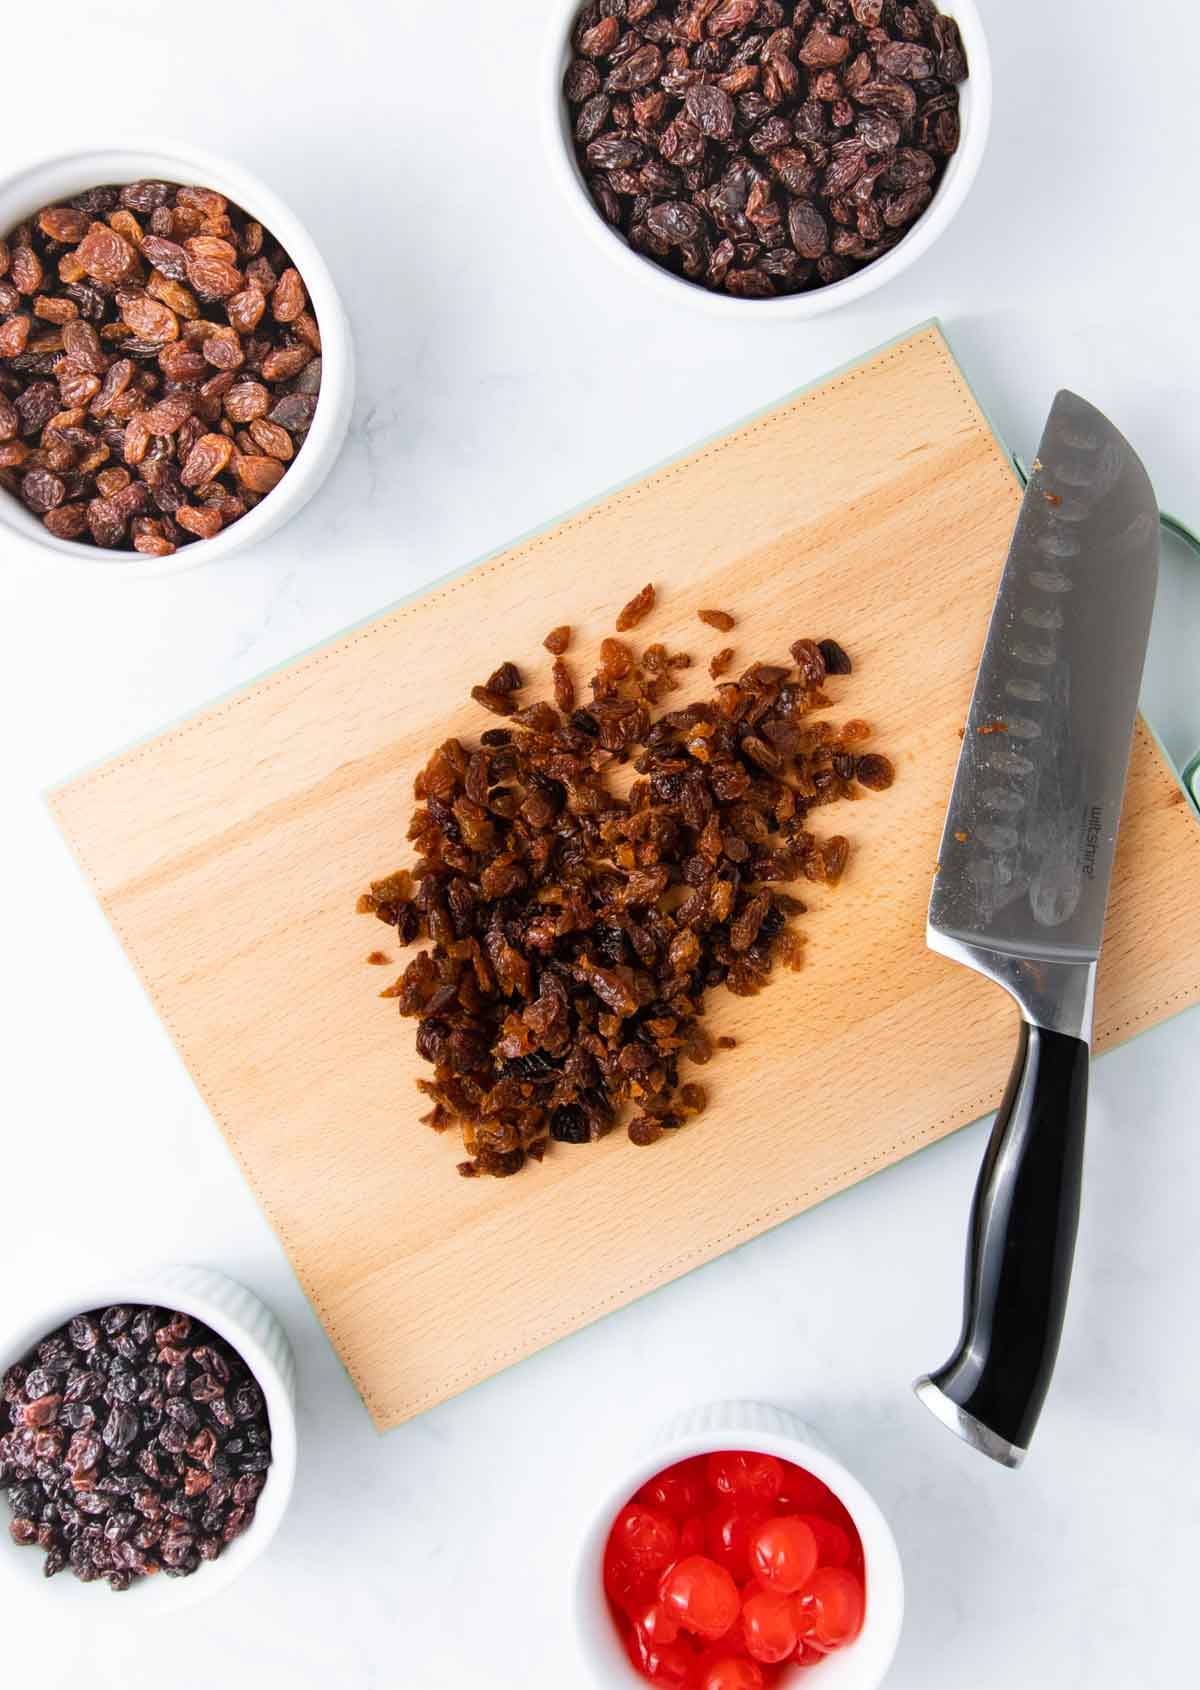 Chopped raisins on a wooden chopping board with a large kitchen knife and other dried fruit in small white bowls.